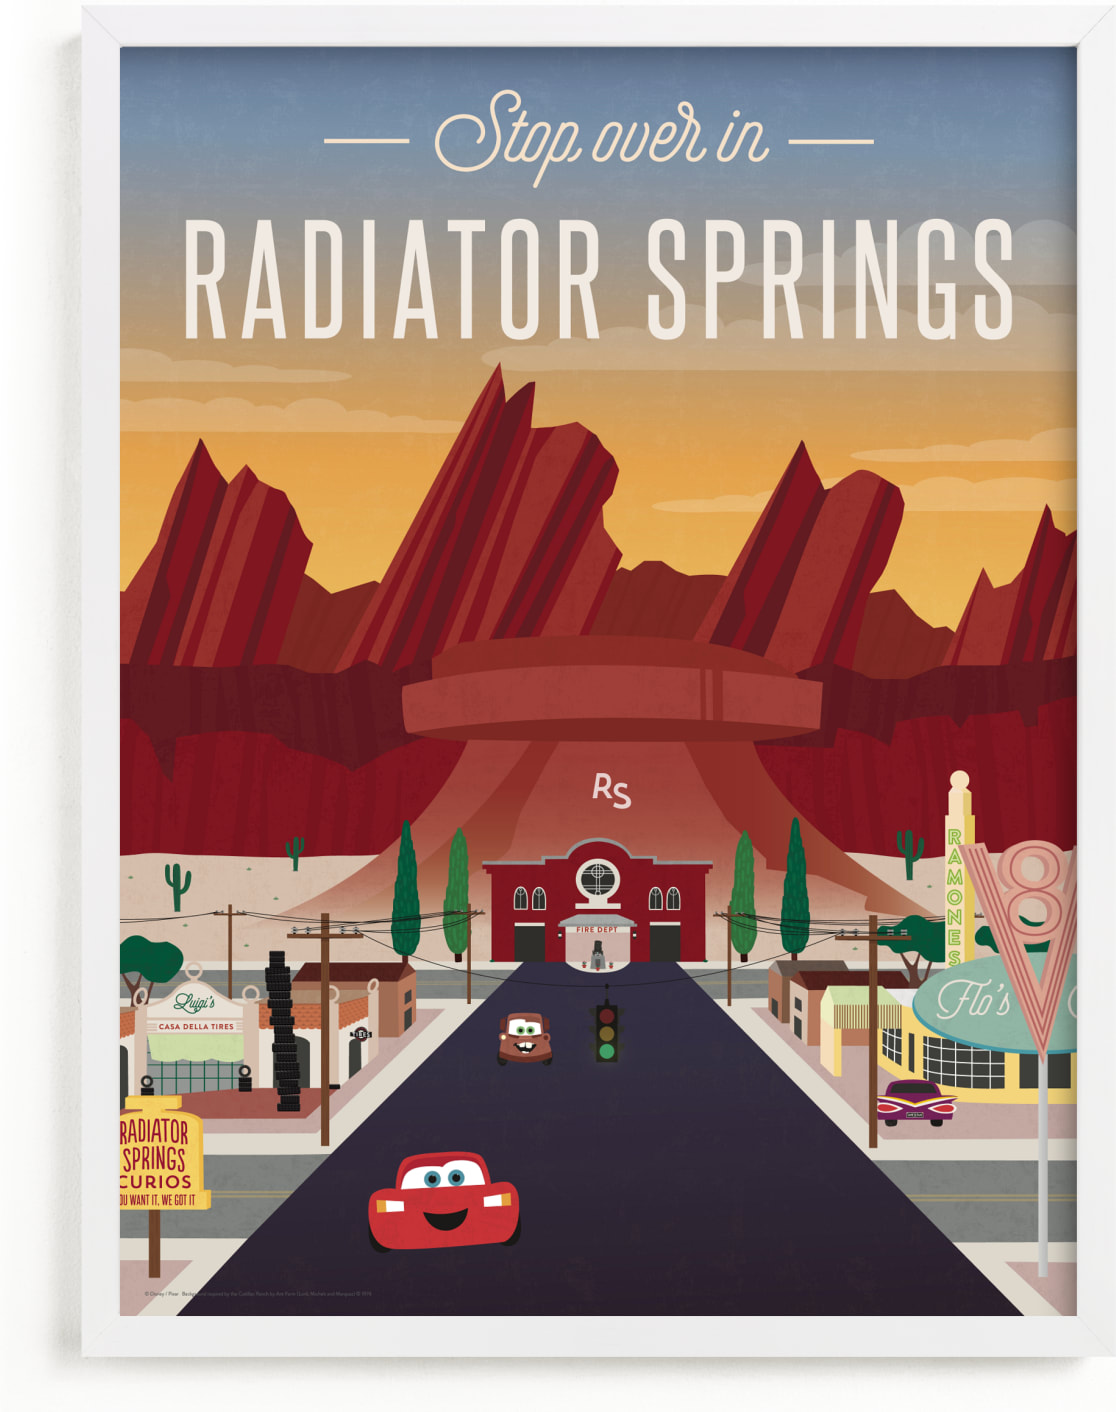 This is a colorful disney art by Erica Krystek called Stop Over In Radiator Springs from Disney and Pixar's Cars.